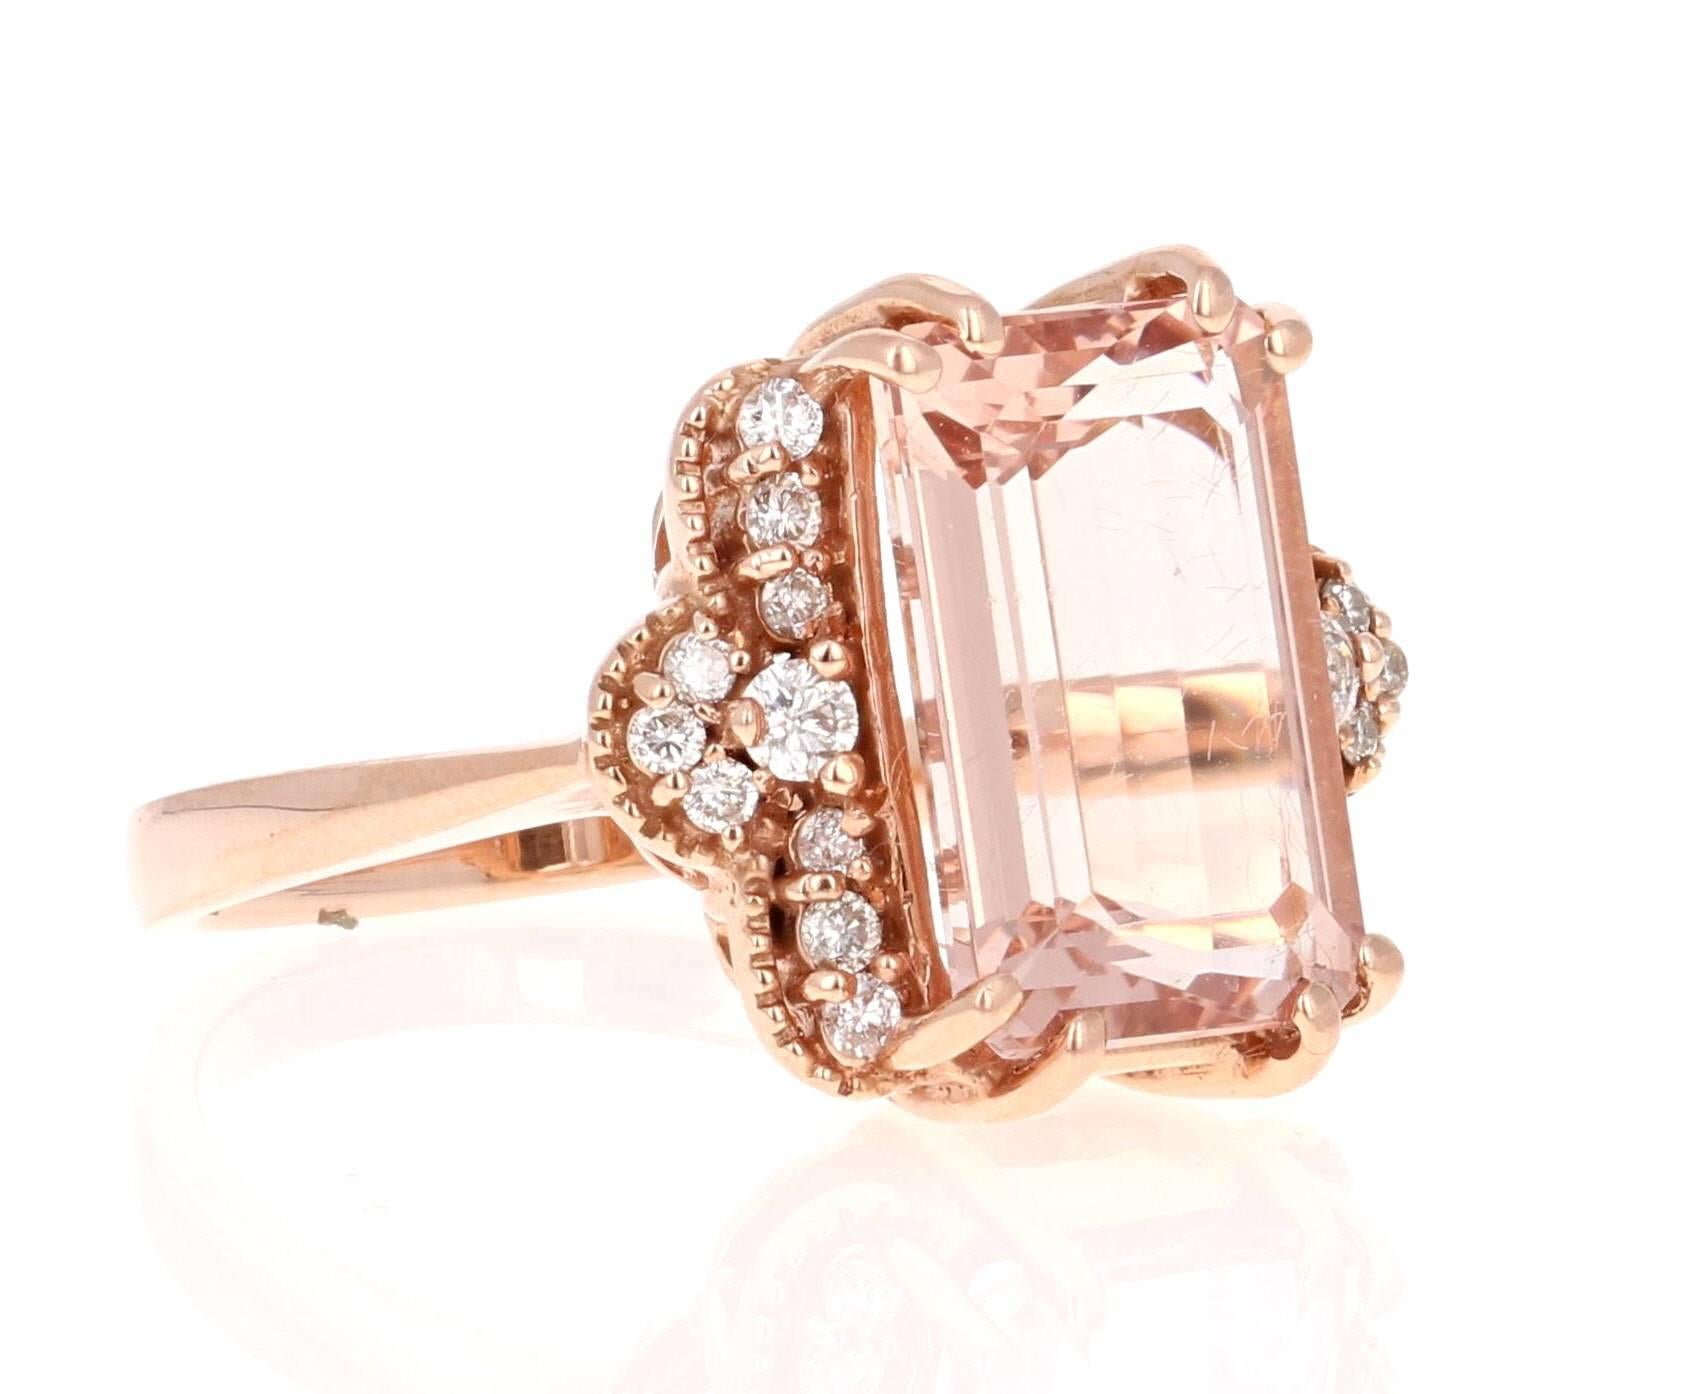 This beautiful Morganite Ring has a large Emerald Cut, 5.25 Carat Morganite as its center and is articulately surrounded by 20 Round Cut Diamonds that weigh 0.31 Carats. 
The style of the setting has an antique look to it. It is 14K Rose Gold and is